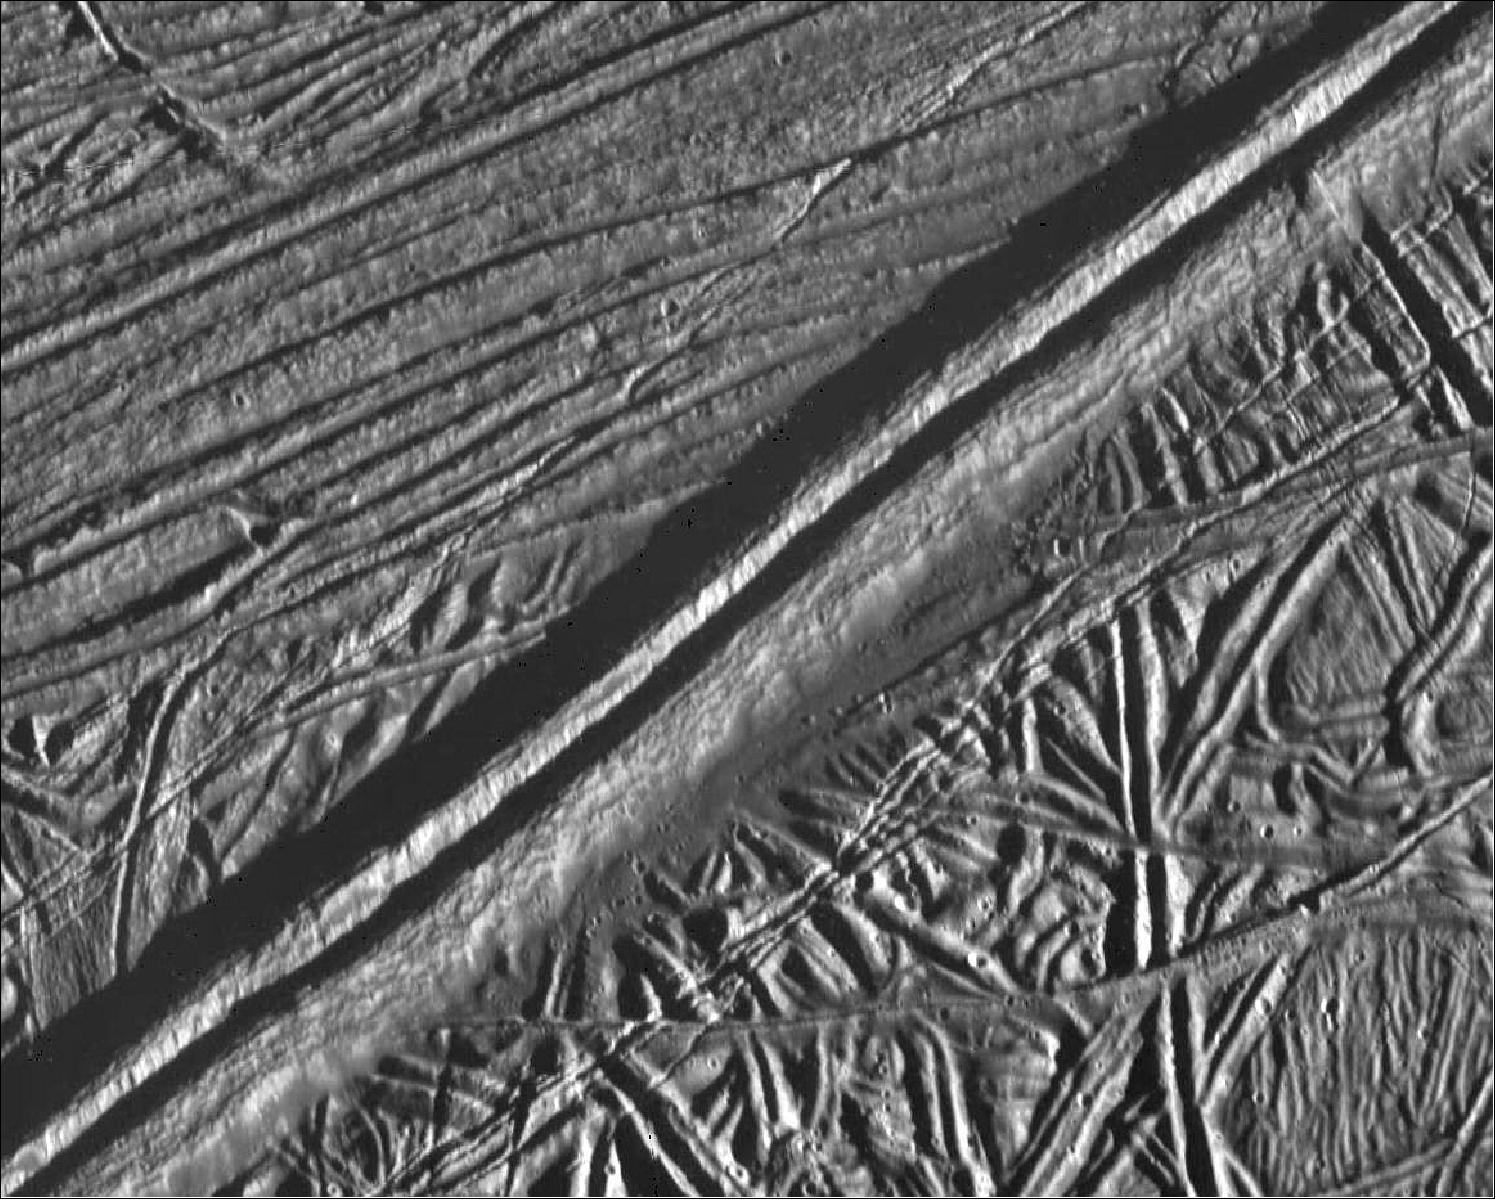 Figure 10: A double ridge cutting across the surface of Europa is seen in this mosaic of two images taken by NASA's Galileo during the spacecraft's close flyby on Feb. 20, 1997. Analysis of a similar feature in Greenland suggests shallow liquid water may be ubiquitous across the Jovian moon's icy shell (image credit: NASA/JPL/ASU)